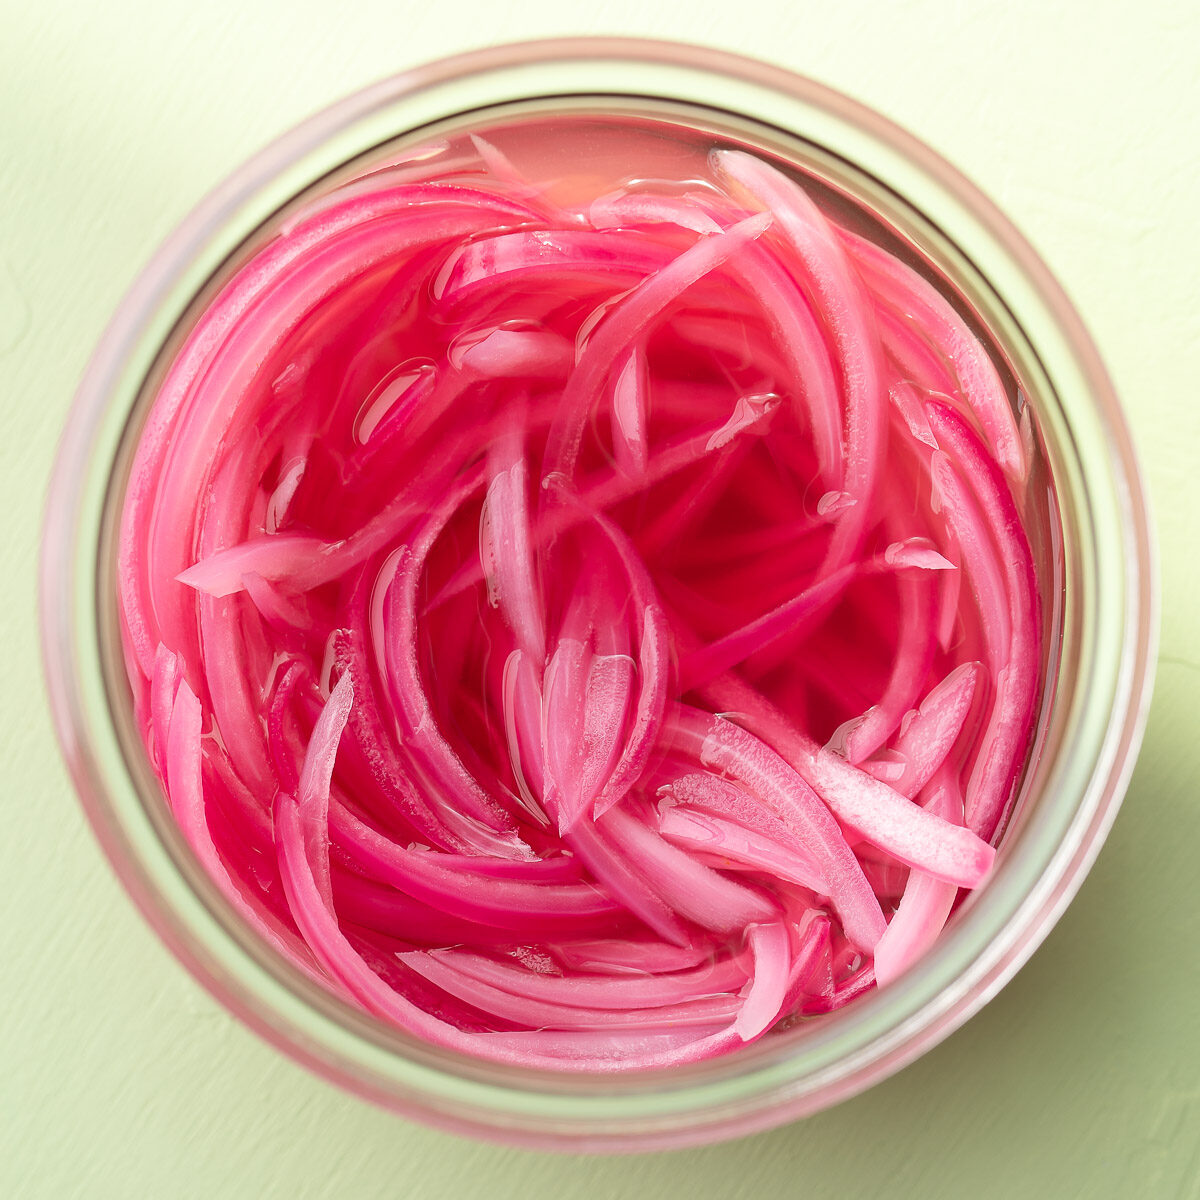 homemade jarred pickled red onions